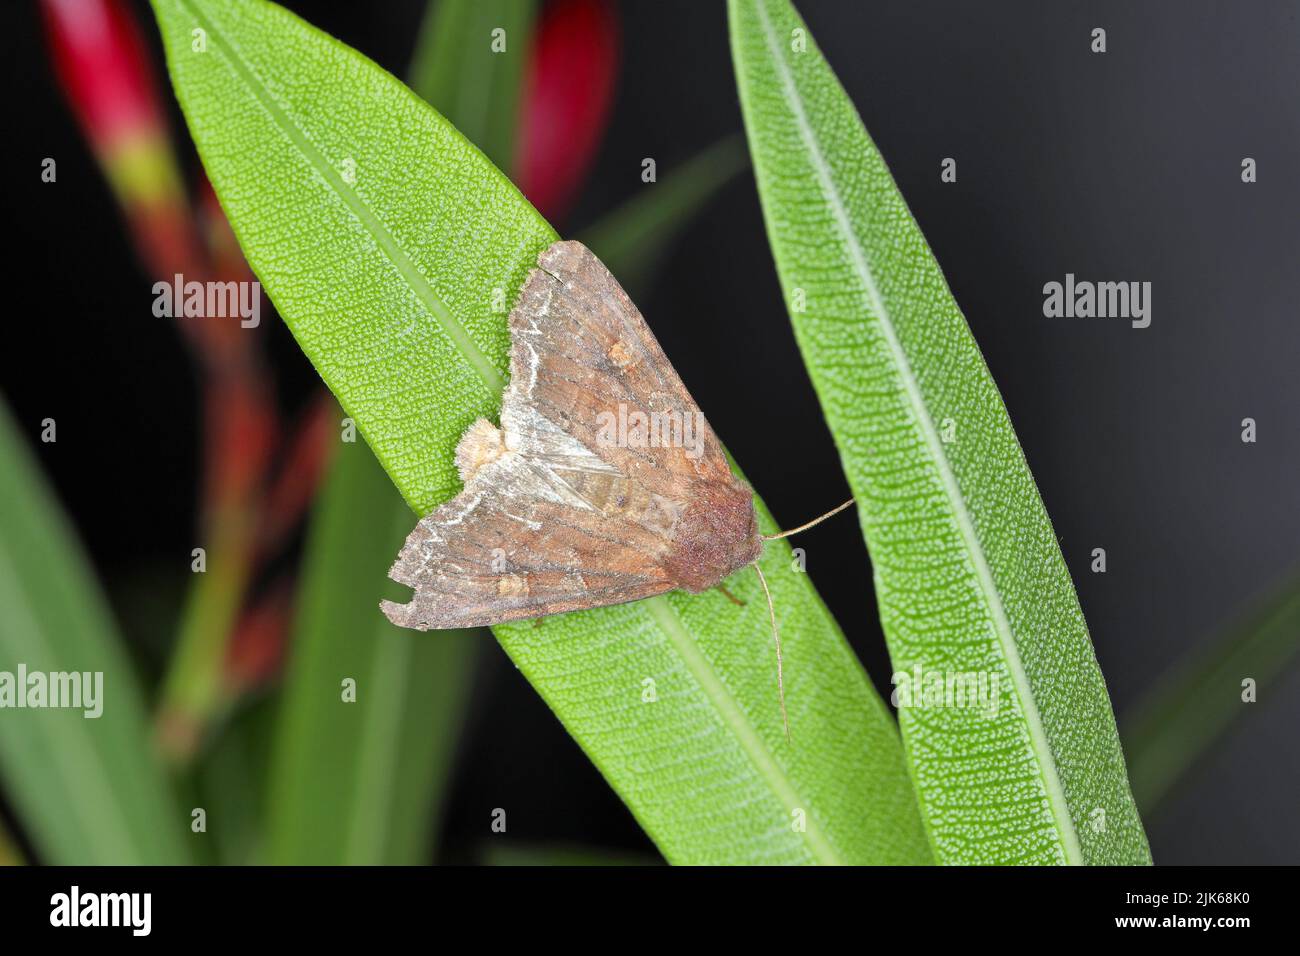 Moth of Noctuidae family (owlet moths, armyworm) on canola leaf. It is a dangerous pest. Stock Photo